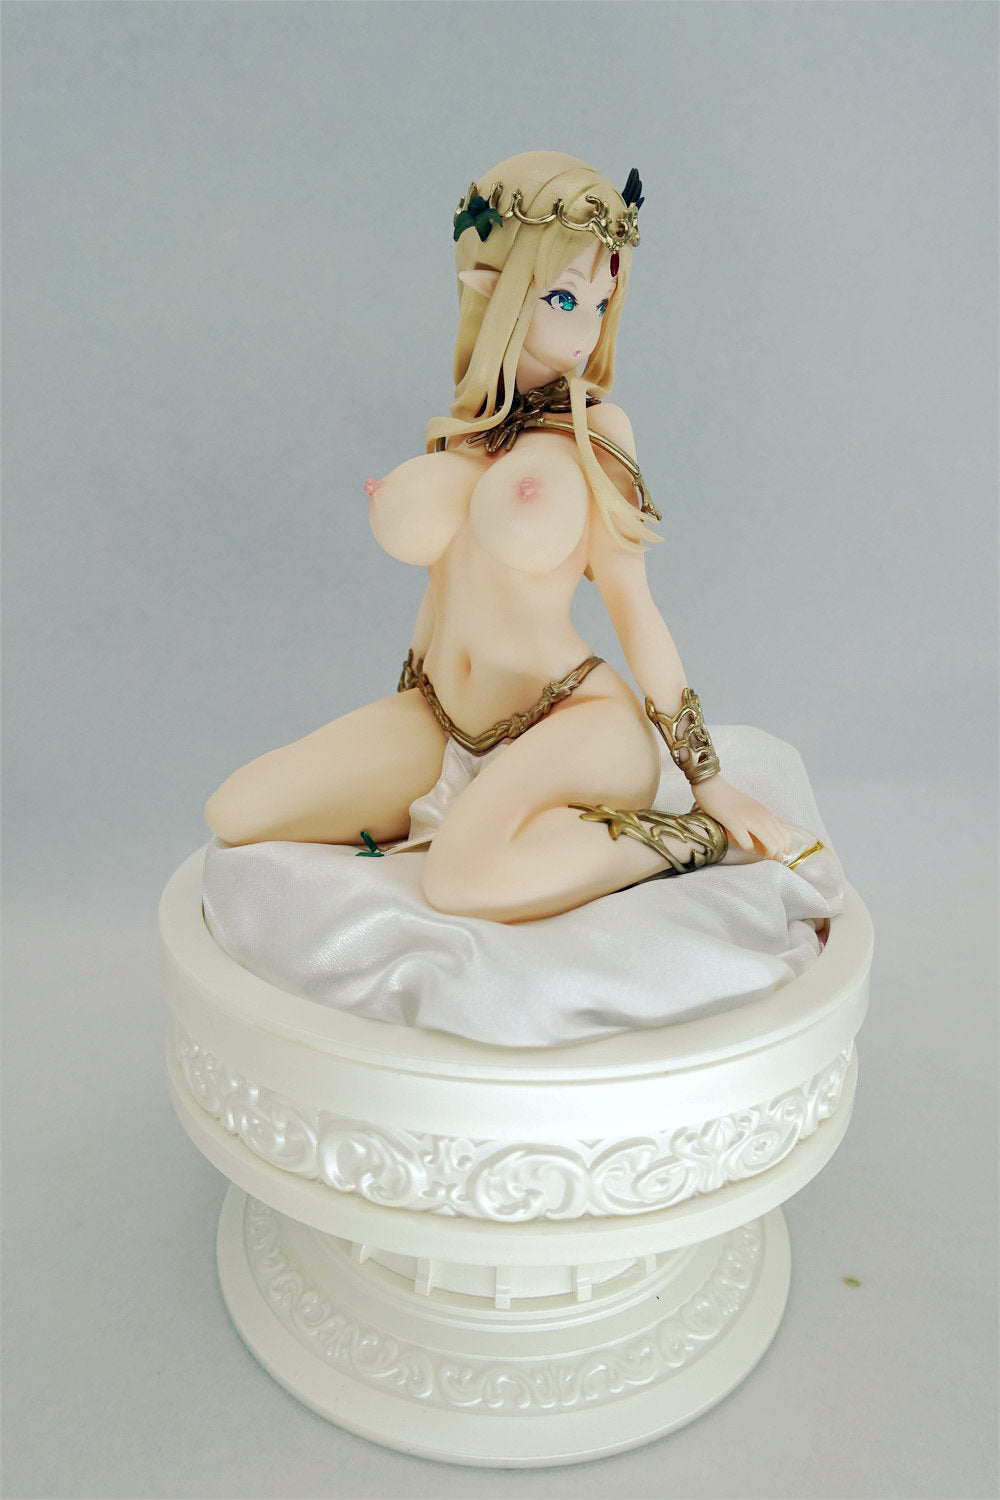 Lily Rerium huge breast 1/6 naked anime figures